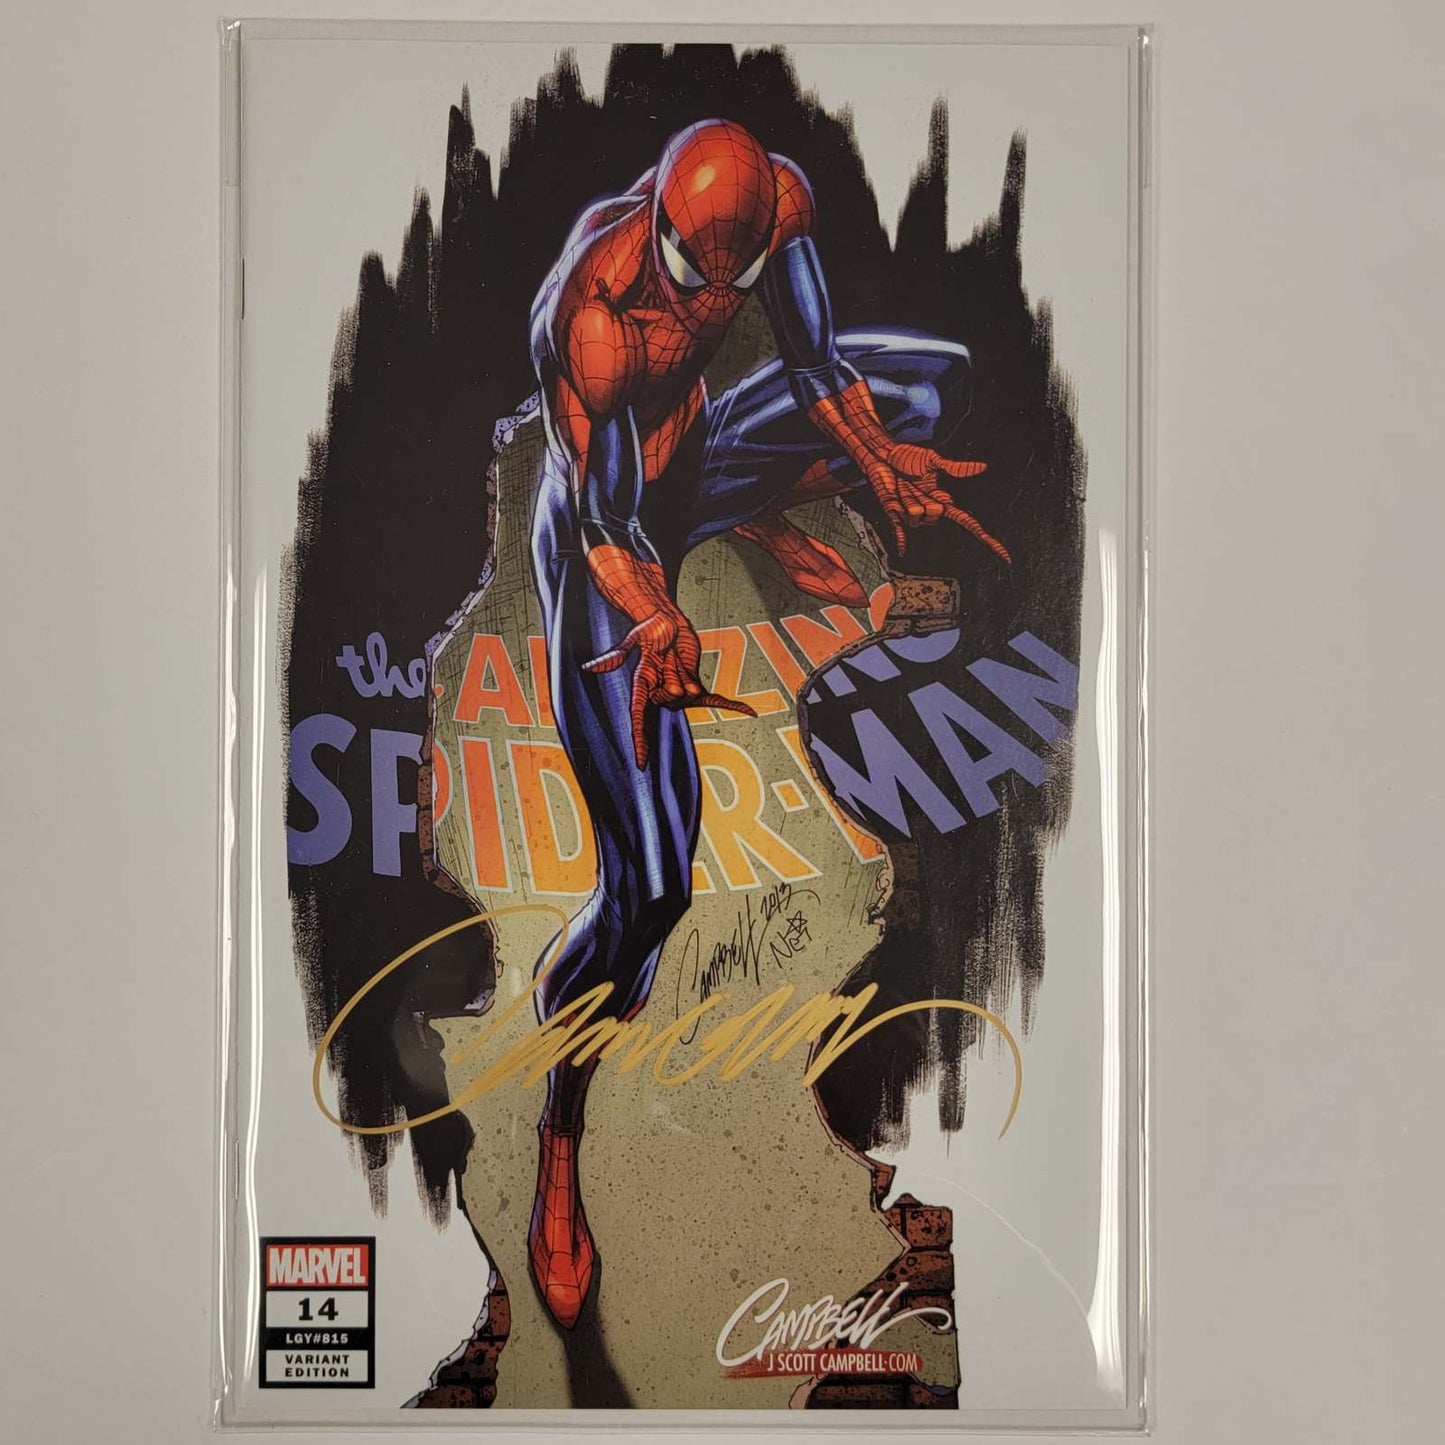 Amazing Spider-Man Vol 5 #014 Signed by J Scott Campbell W/COA